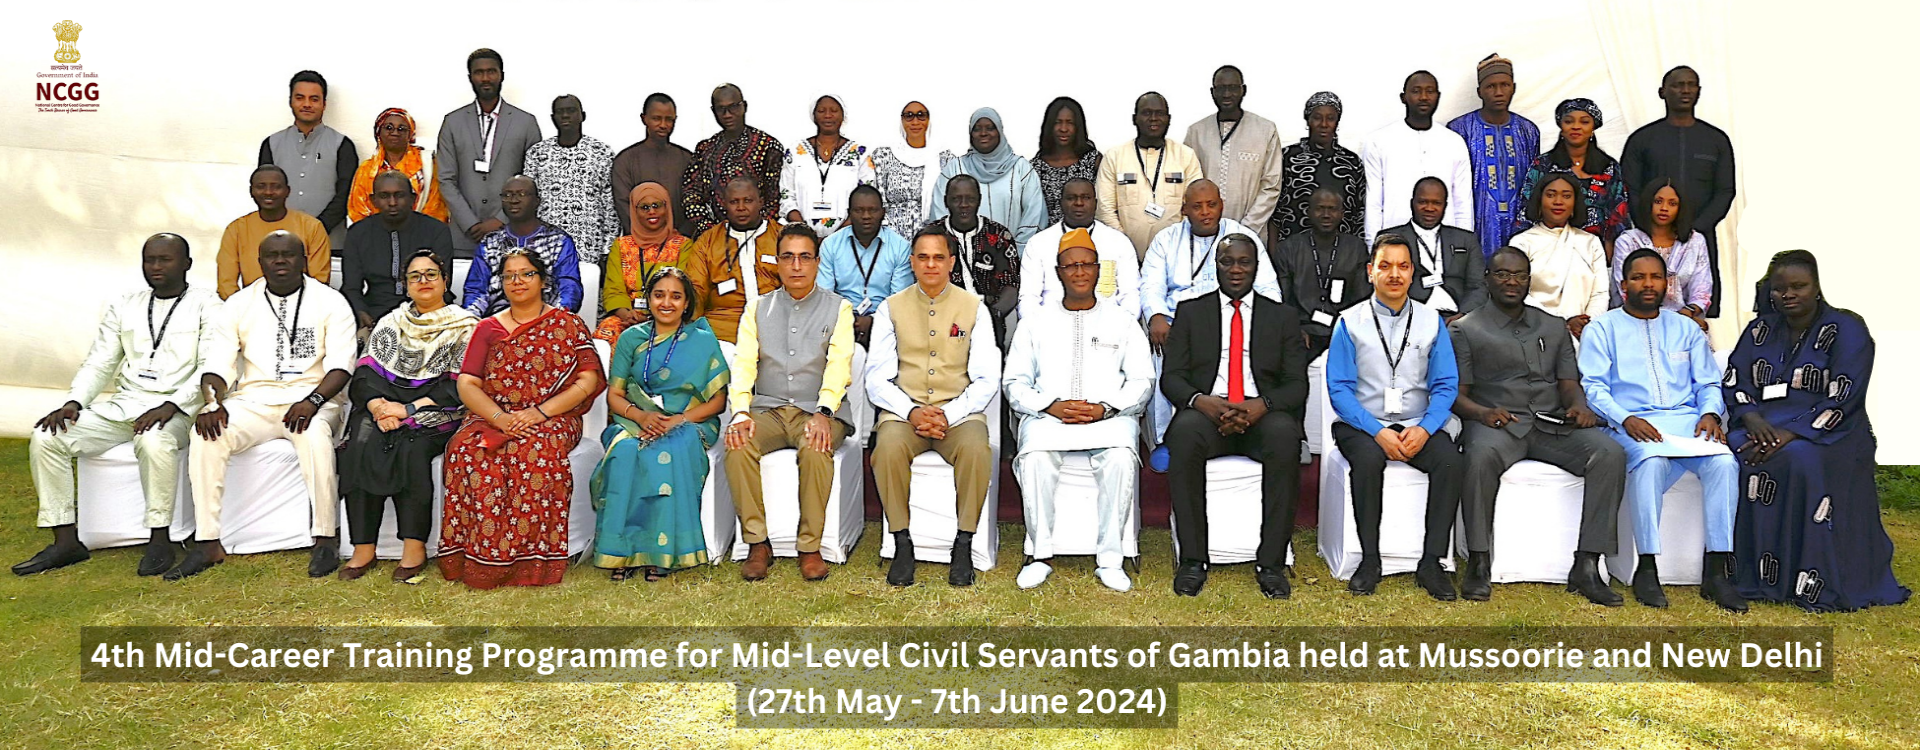 4th Mid-Career Training Programme for Mid-Level Gambian Civil Servants